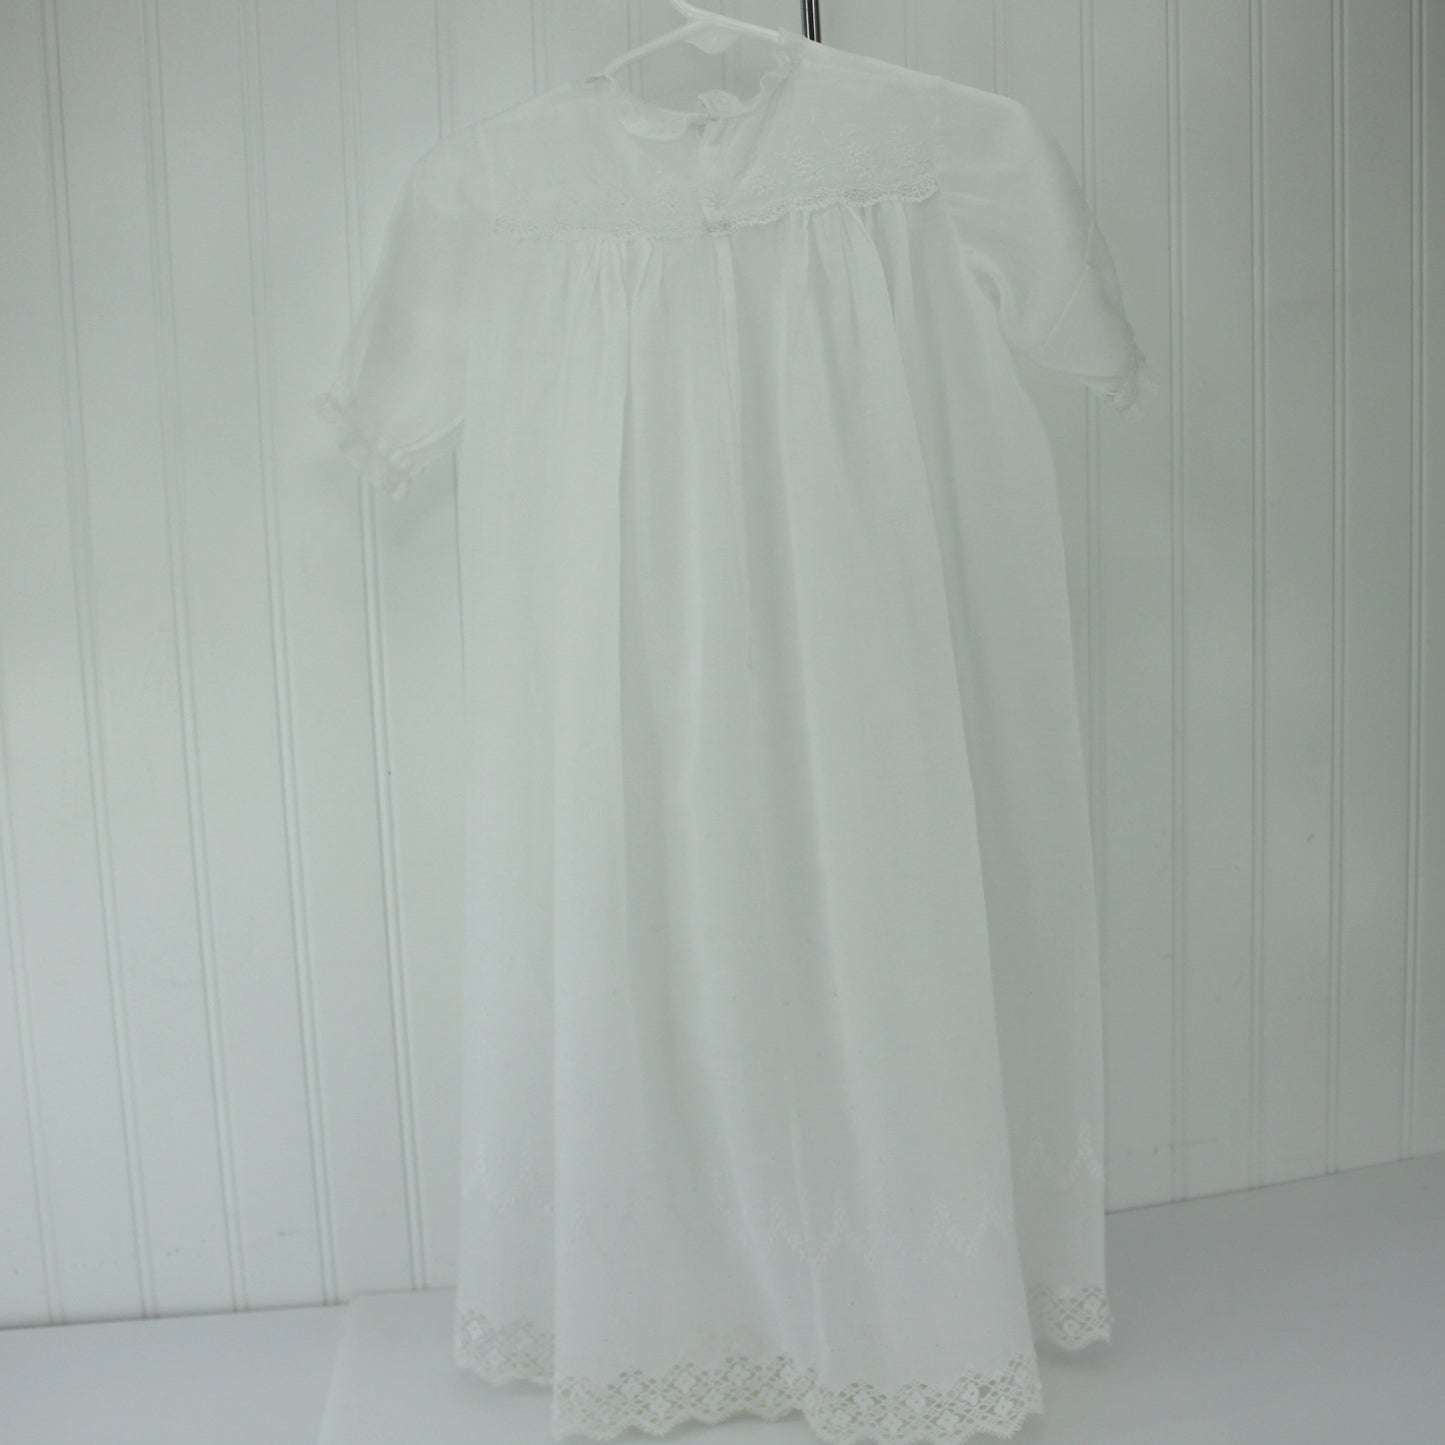 Collection 5 Pieces Infant Victorian Christening Summer Dresses Lace Embroidery Organdy Great for Large Dolls victorian baby clothes